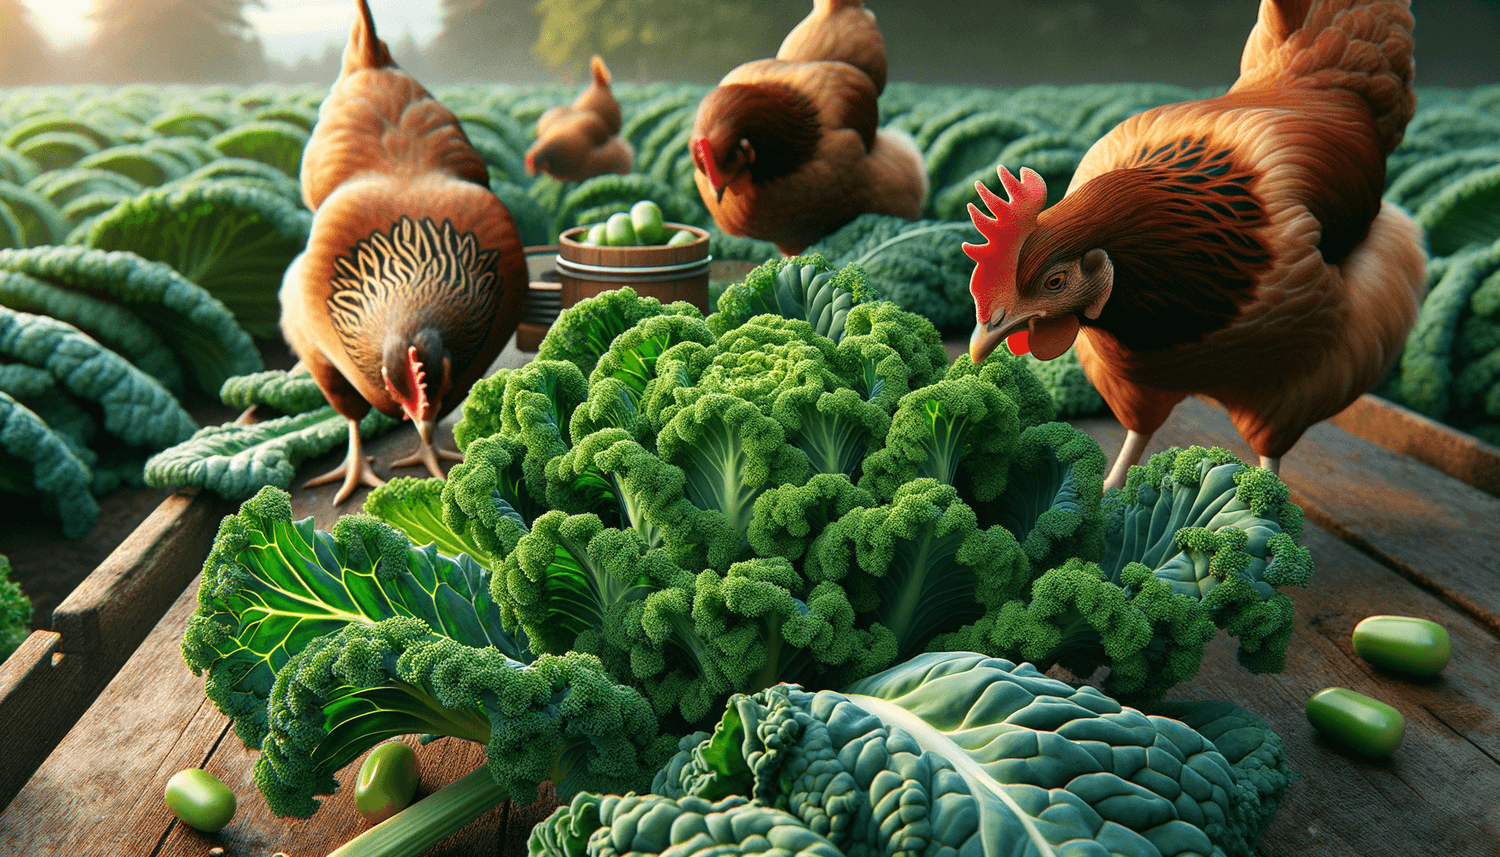 Can Chickens Eat Kale Stems?